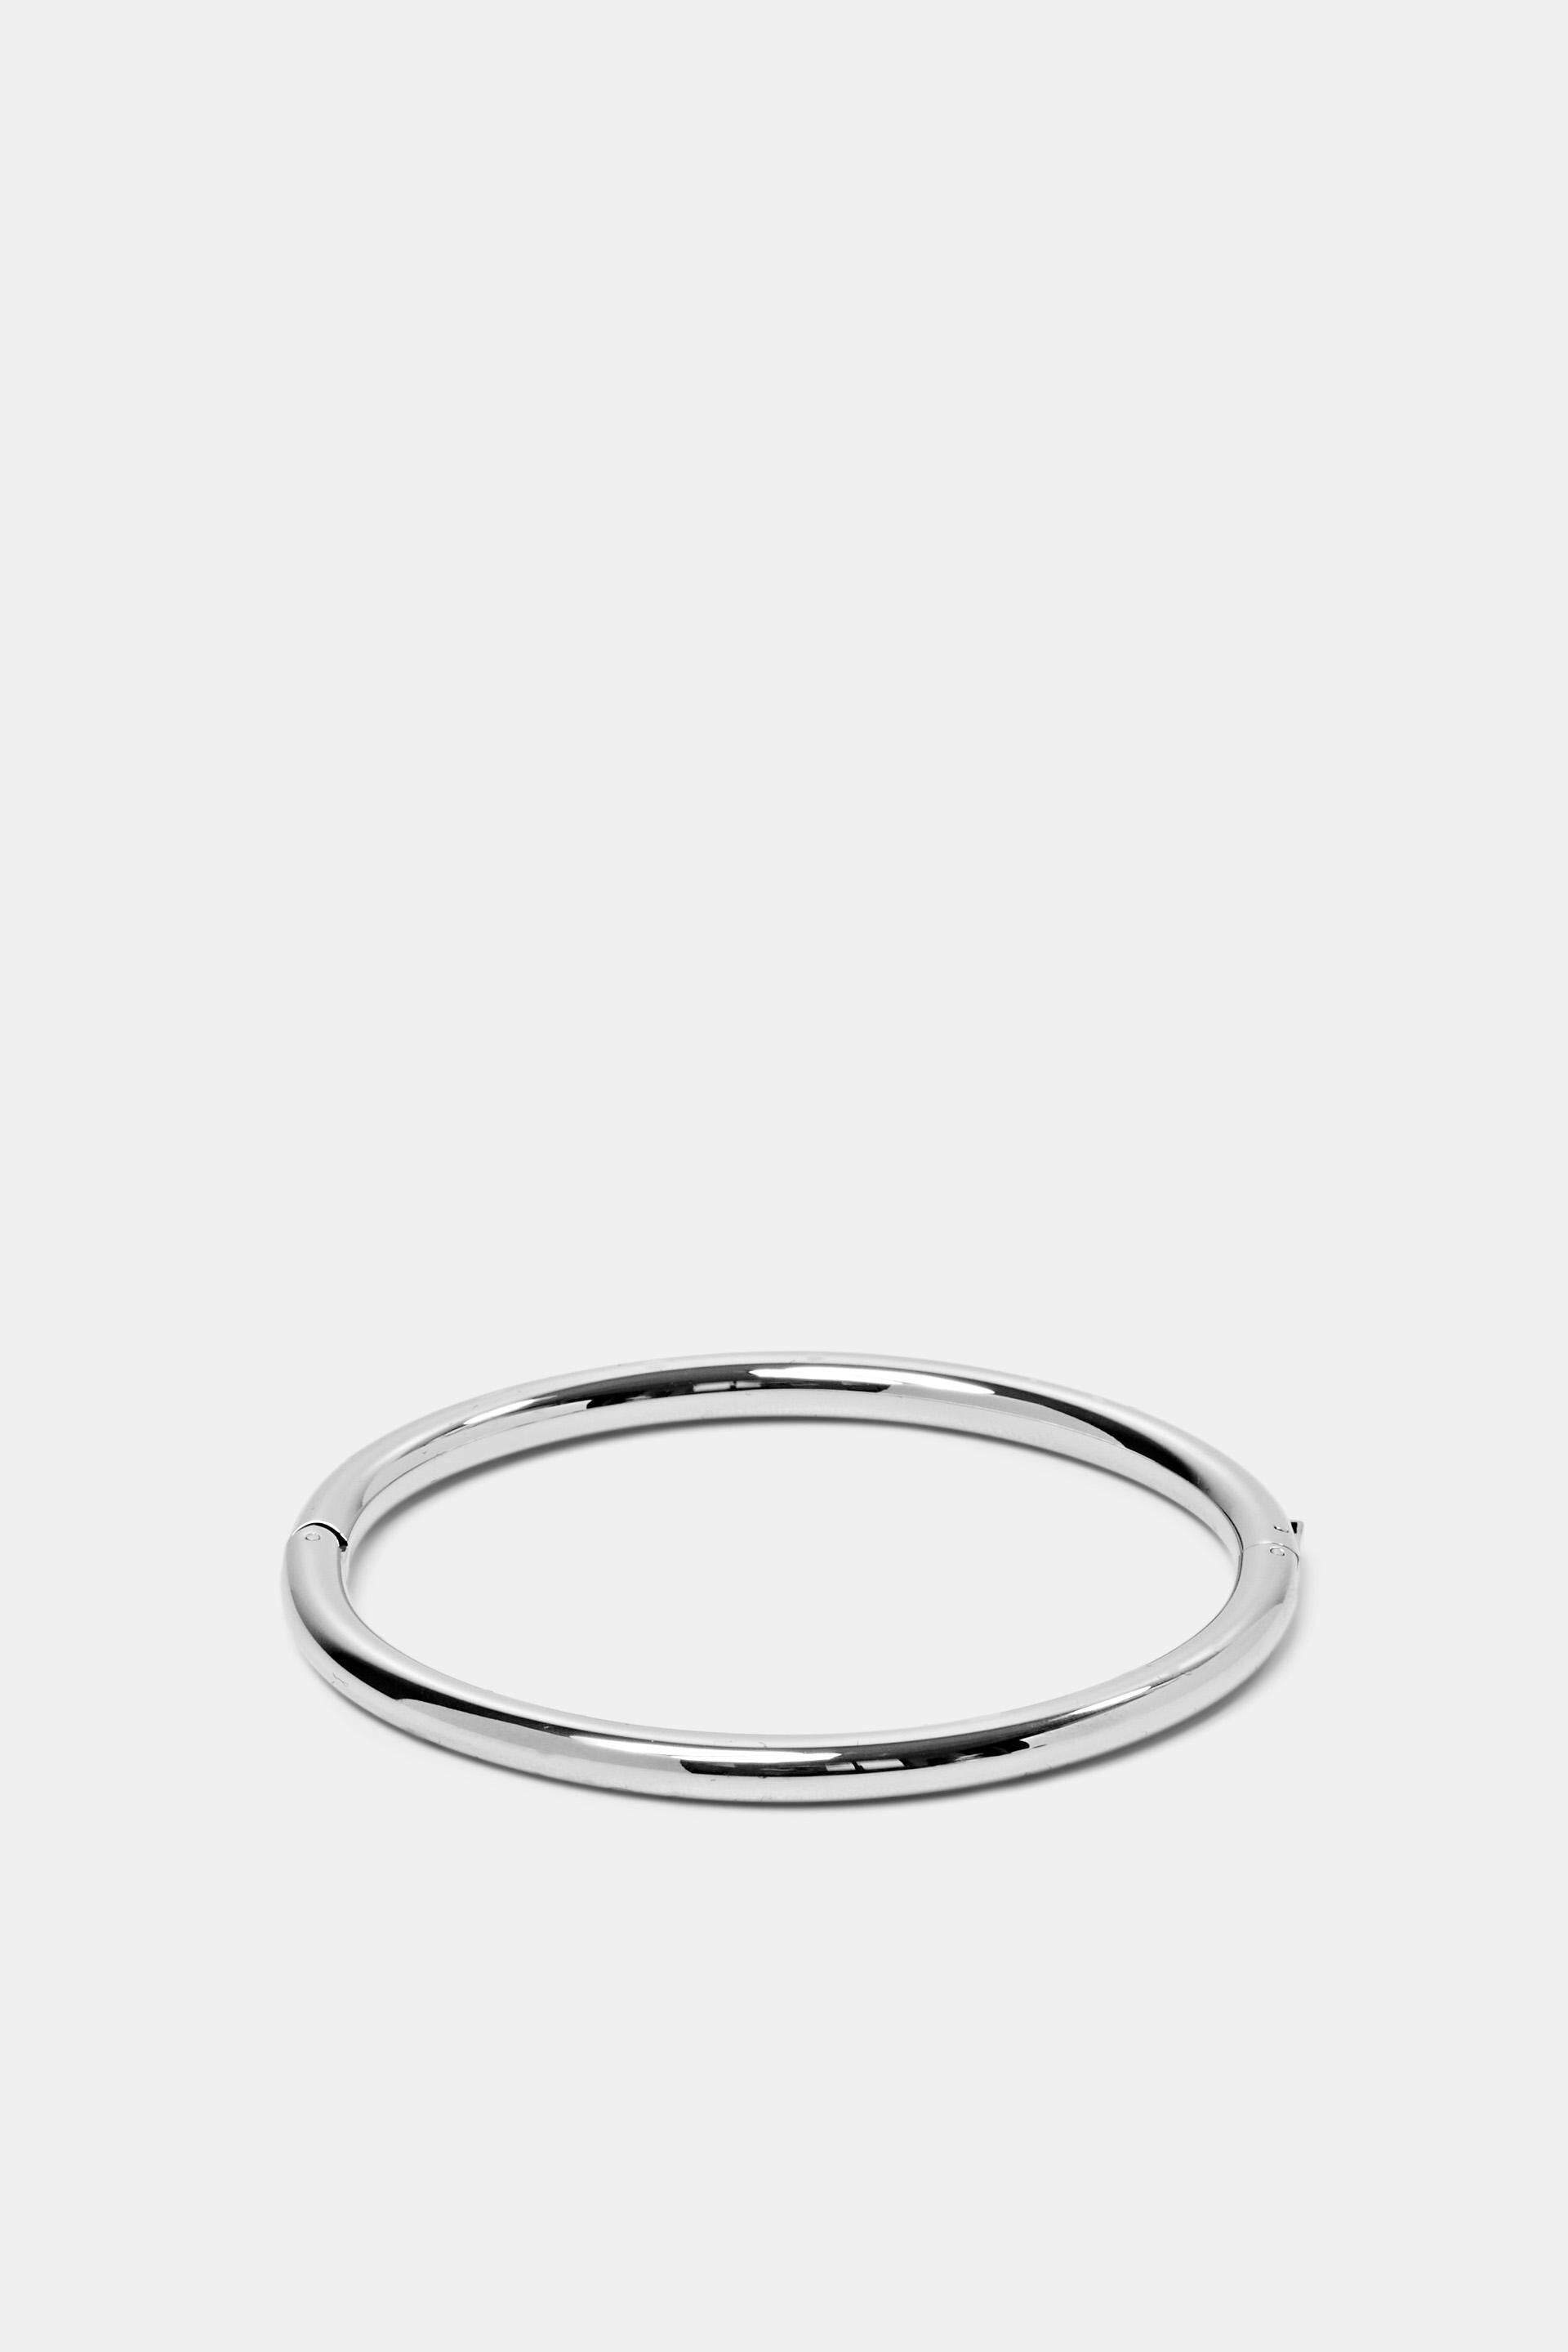 Esprit Online Store Bangle made of stainless steel